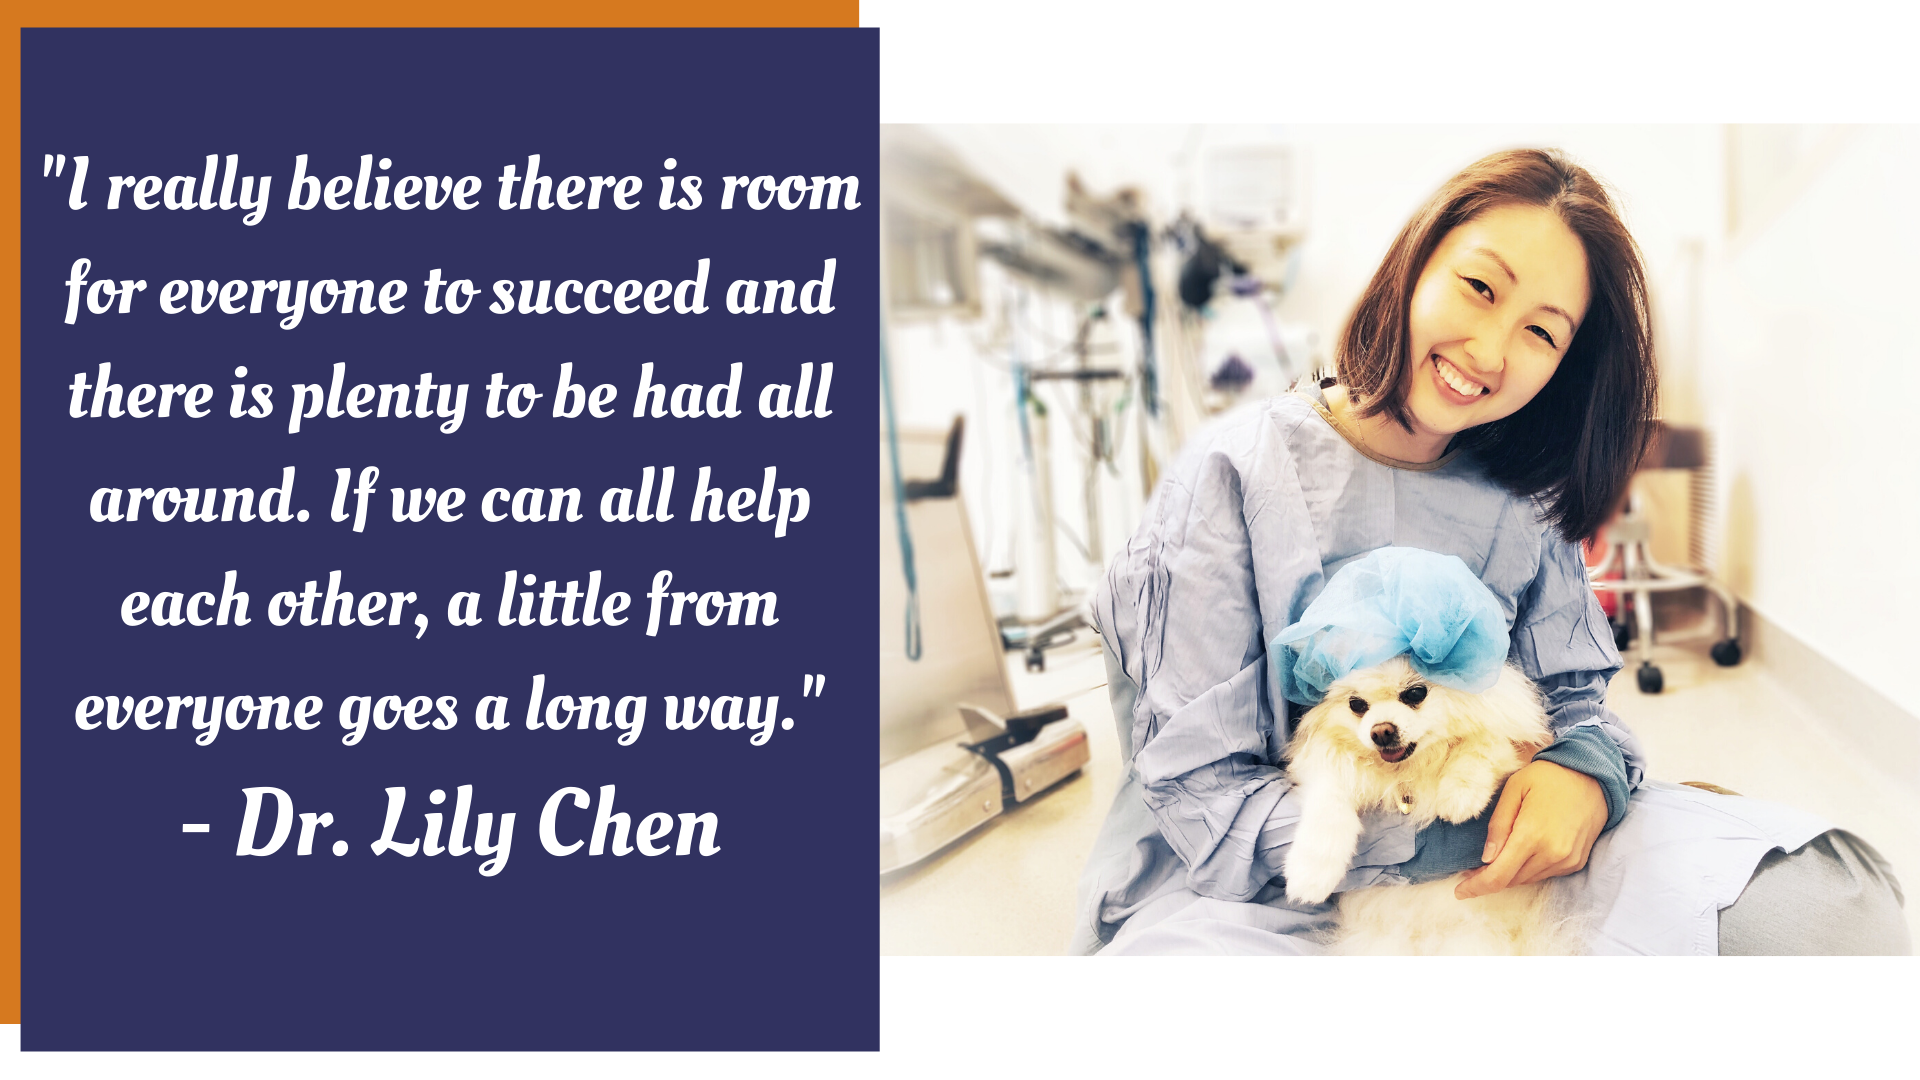 Dr. Lily Chen